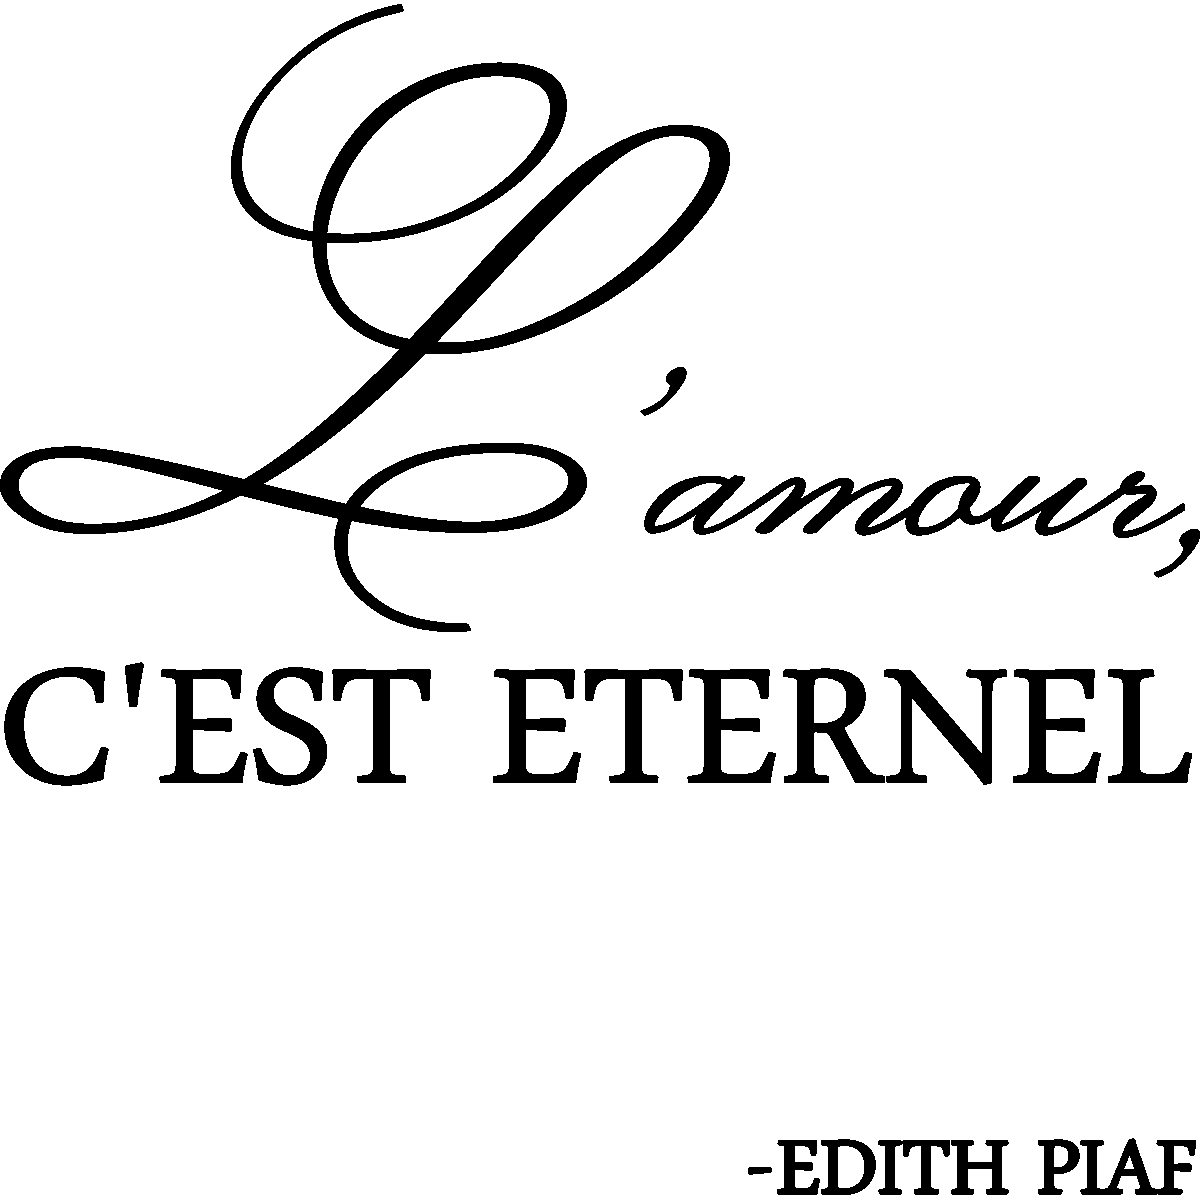 Wall Sticker Quote L Amour C Est Eternel Edith Piaf Decoration Wall Decals Quote Wall Stickers French Ambiance Sticker